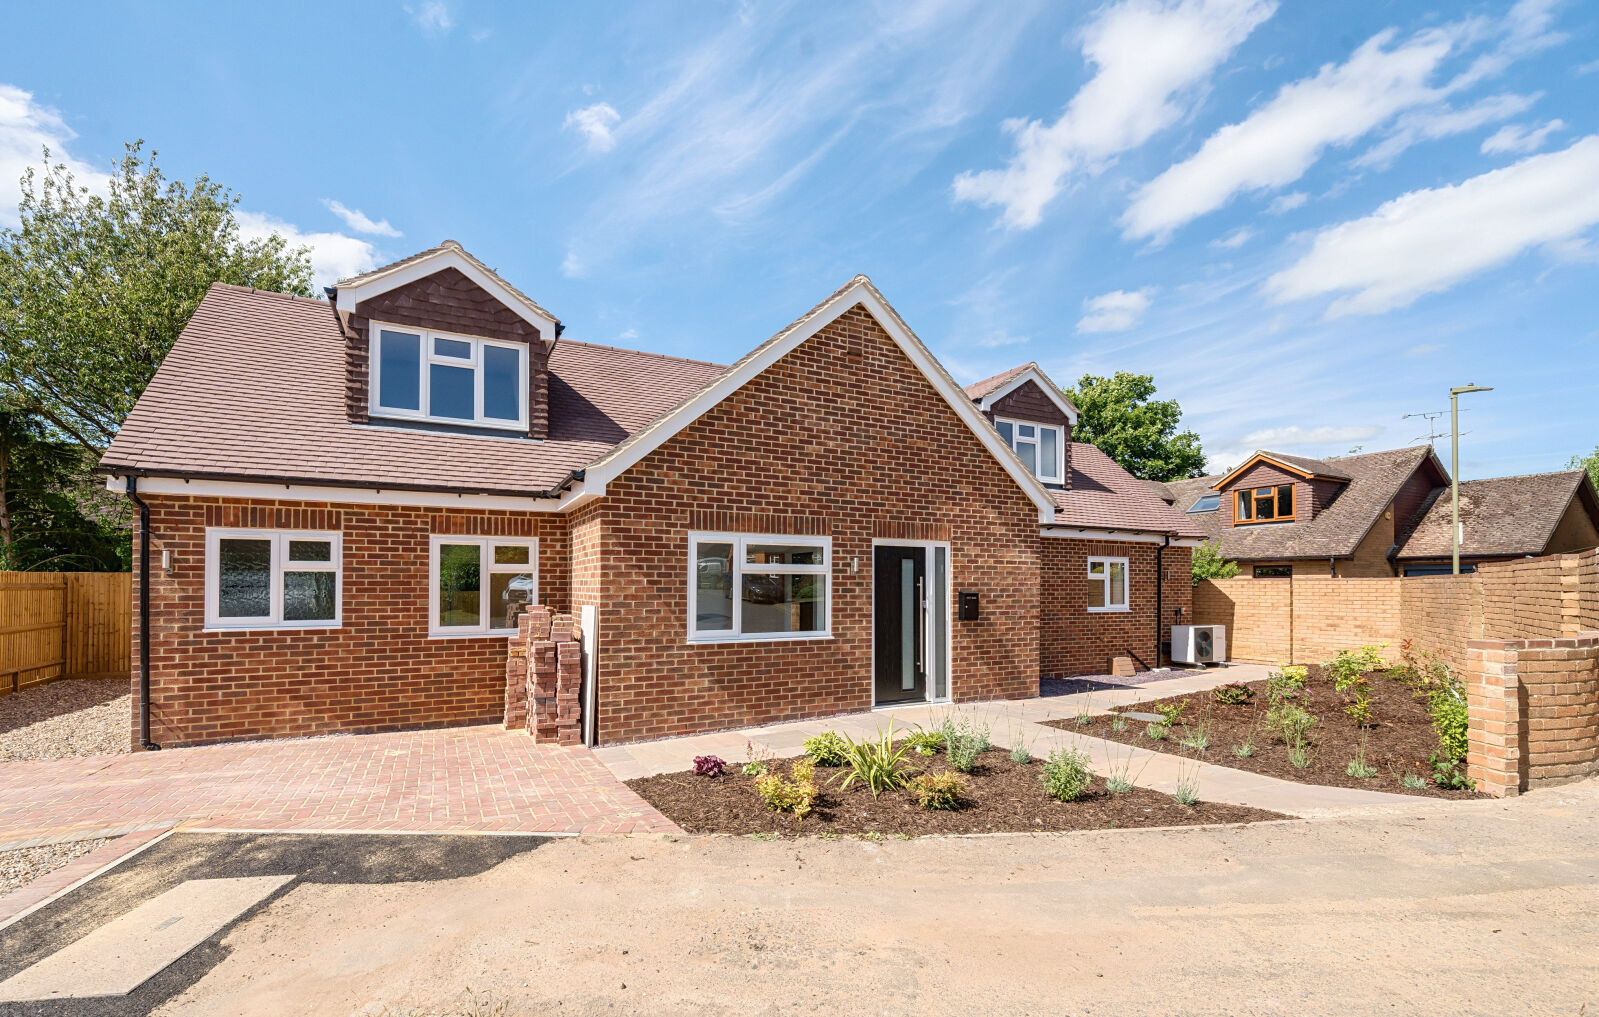 3 bedroom detached house for sale West Chiltern, Reading, RG8, main image